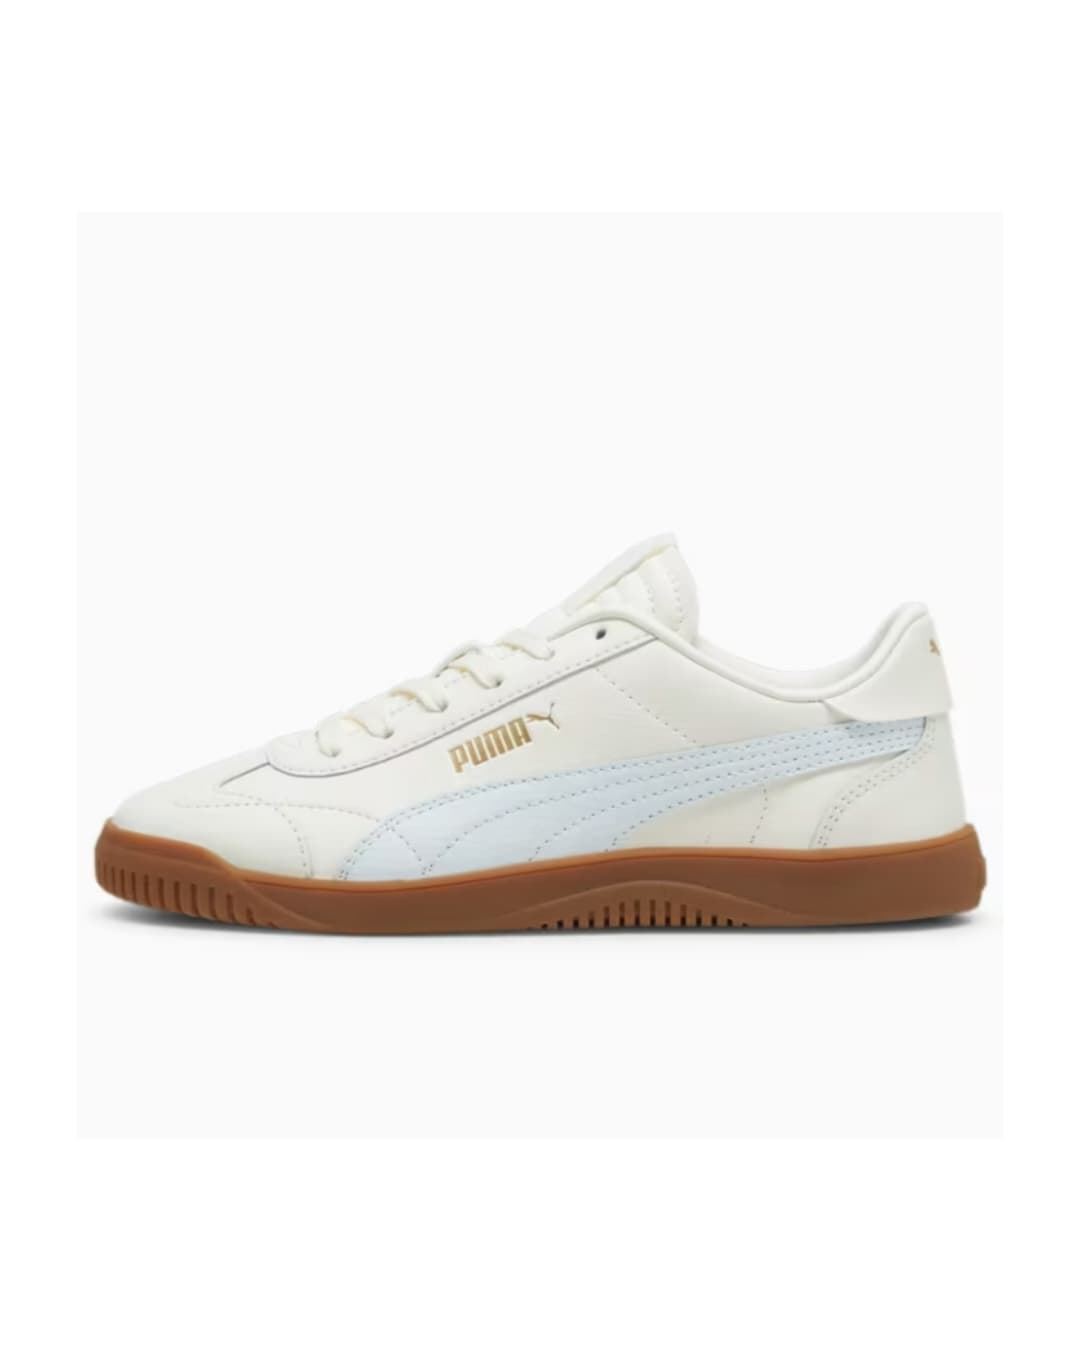 Puma Club 5v5 Sneakers for girls and women - Image 4